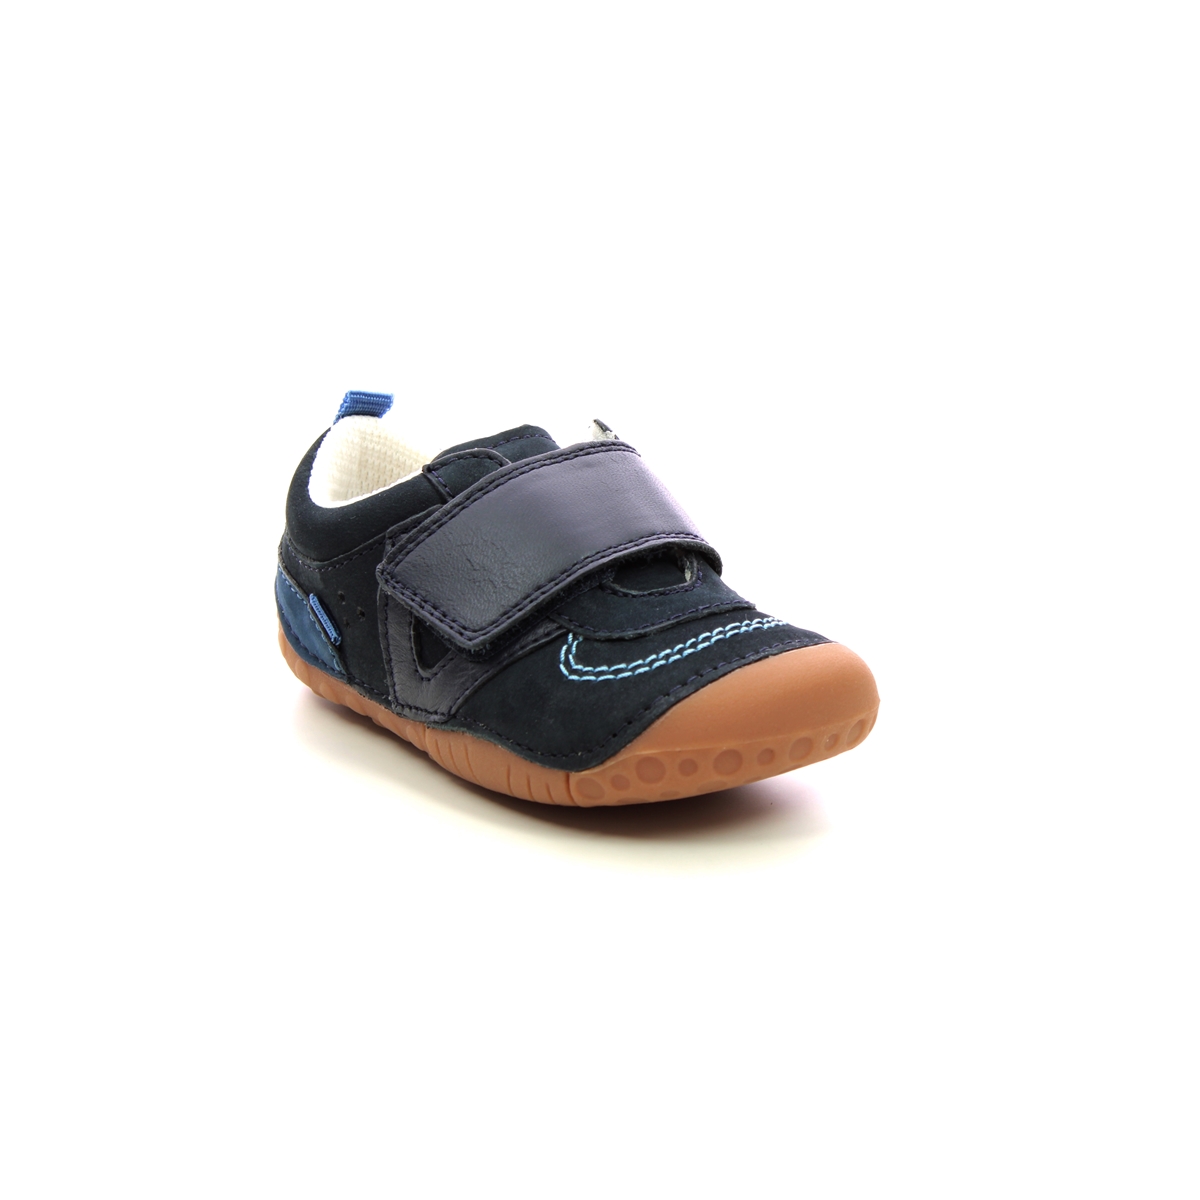 Start Rite Shuffle 1v Navy leather Kids Boys First Shoes 0786-96F in a Plain Leather in Size 4.5